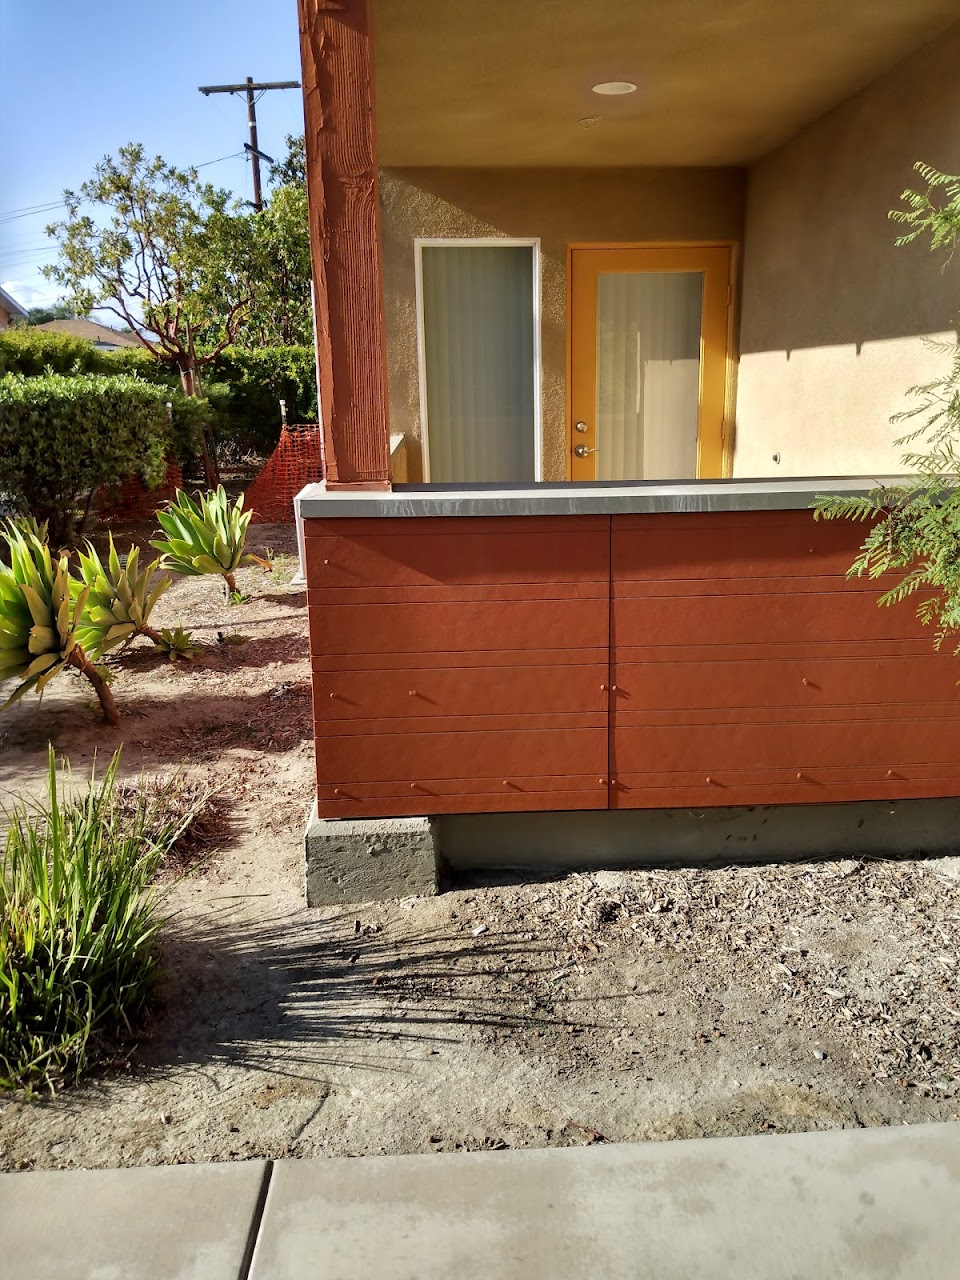 Photo of SEASONS AT COMPTON. Affordable housing located at 15810 S FRAILEY AVE COMPTON, CA 90221